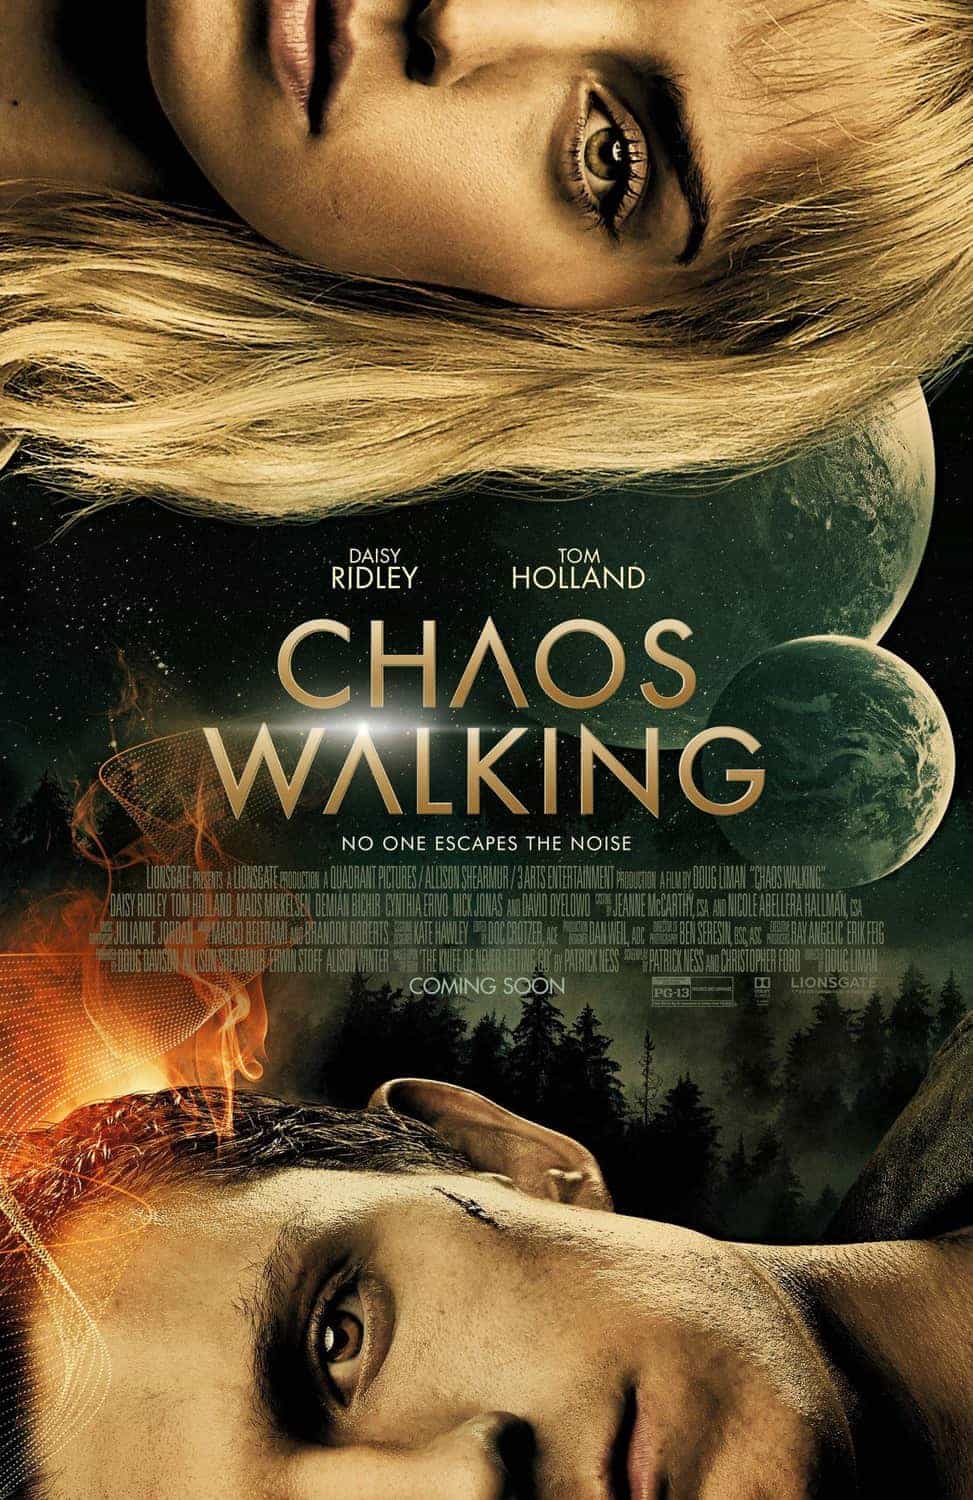 First trailer for Chaos Walking starring Tom Holland and Daisy Ridley